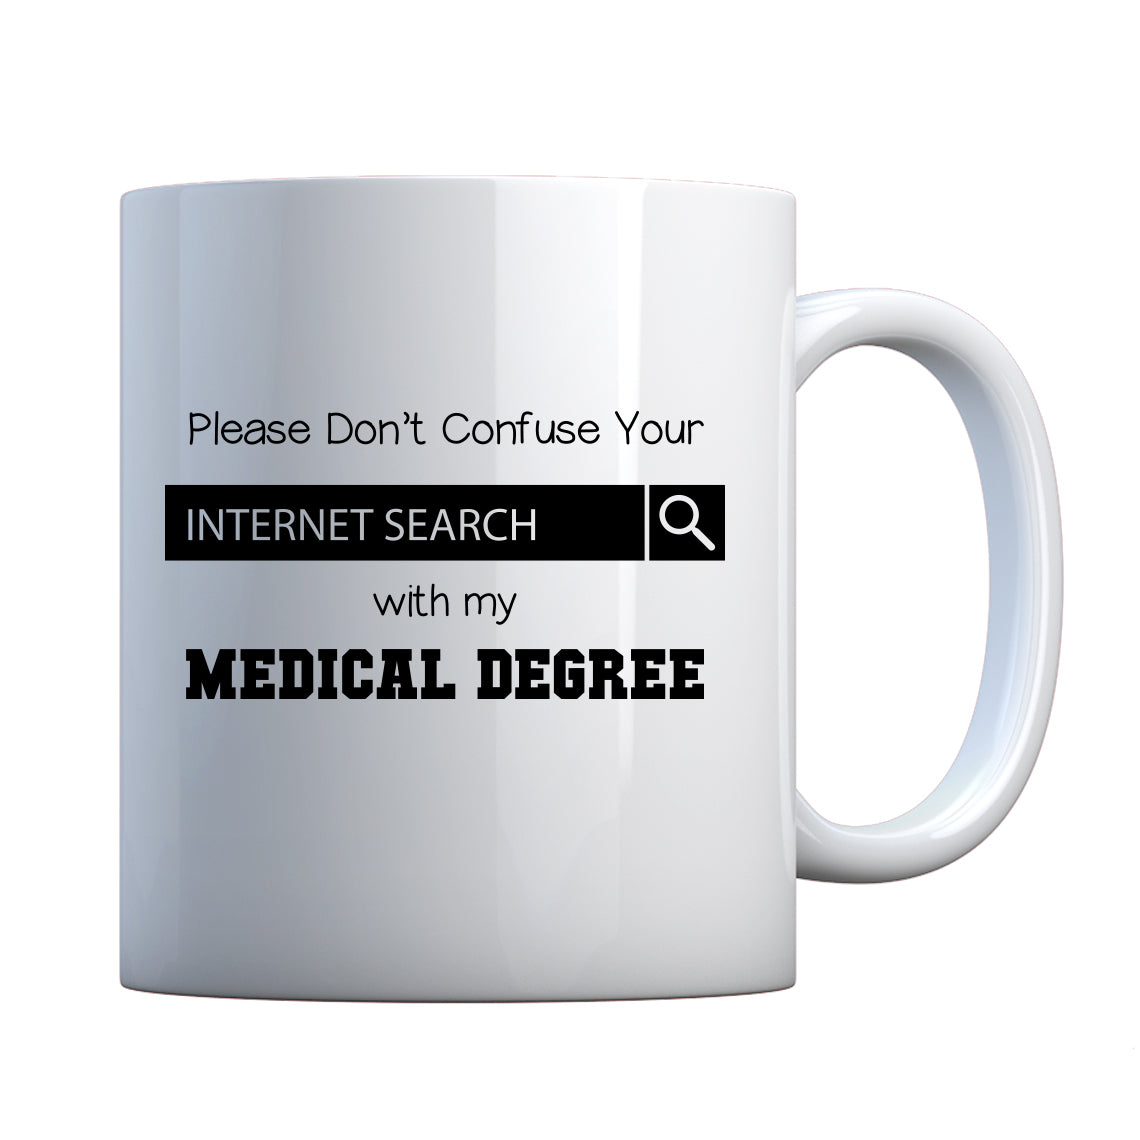 Don't Confuse Your Search Ceramic Gift Mug